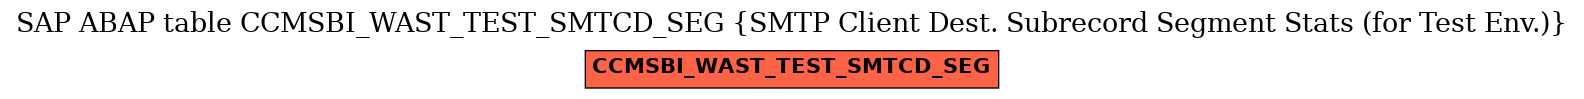 E-R Diagram for table CCMSBI_WAST_TEST_SMTCD_SEG (SMTP Client Dest. Subrecord Segment Stats (for Test Env.))